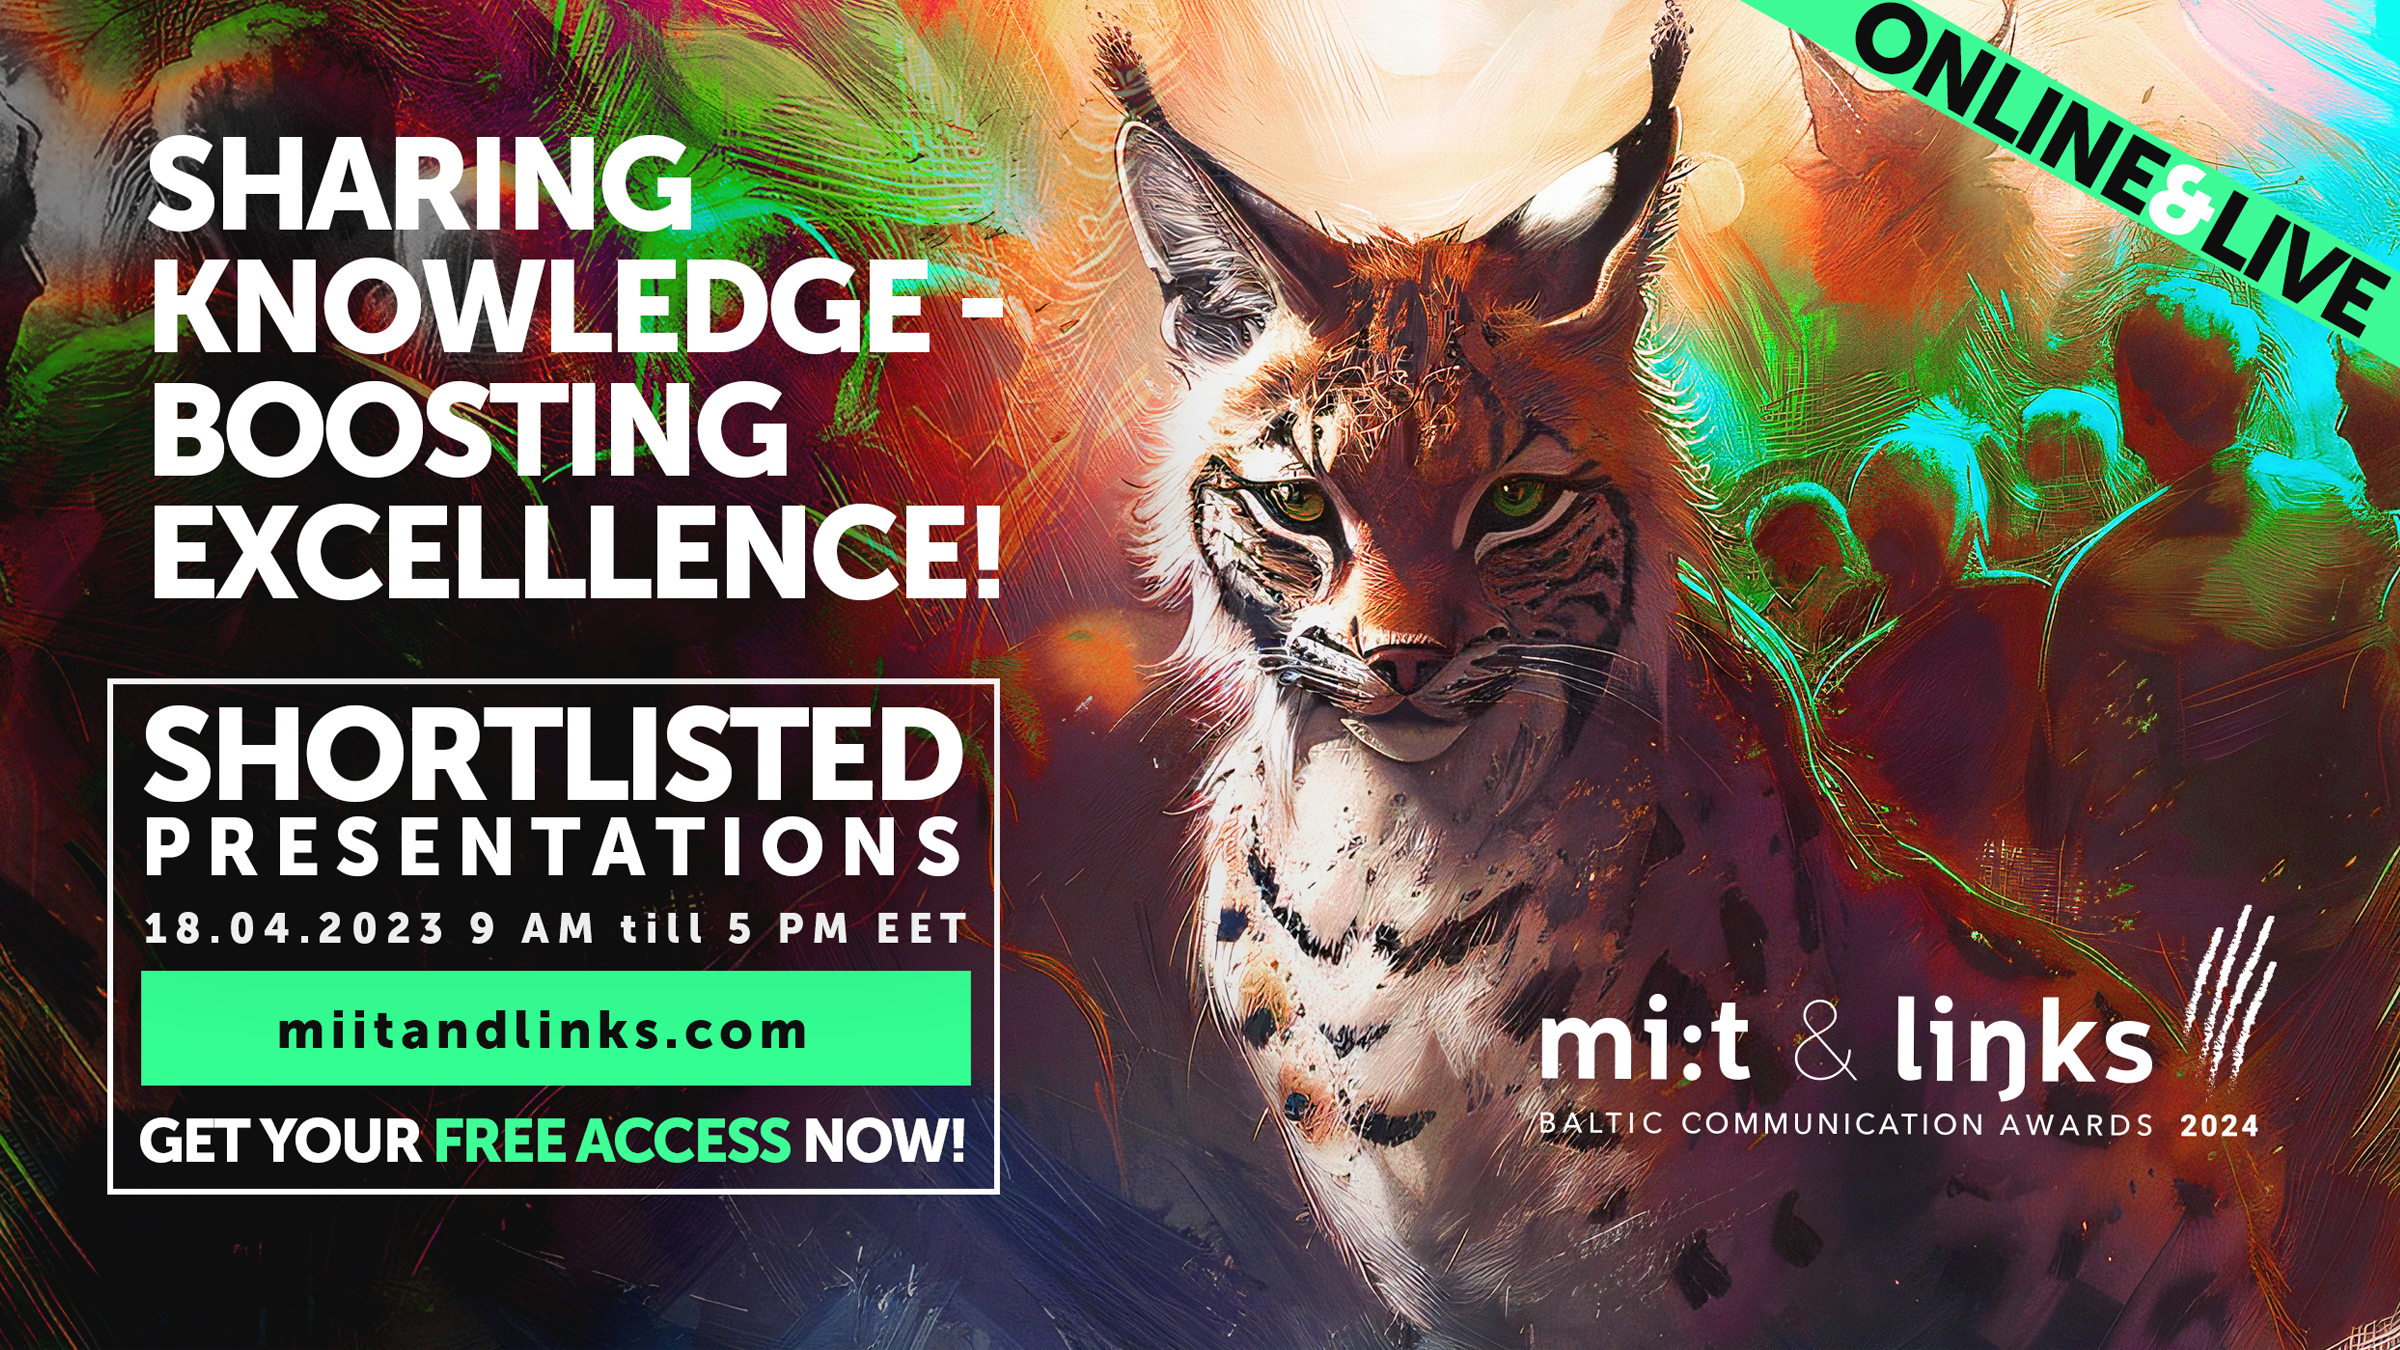 Register for Free Access to Mi:t&Links 2024 Shortlisted Presentations